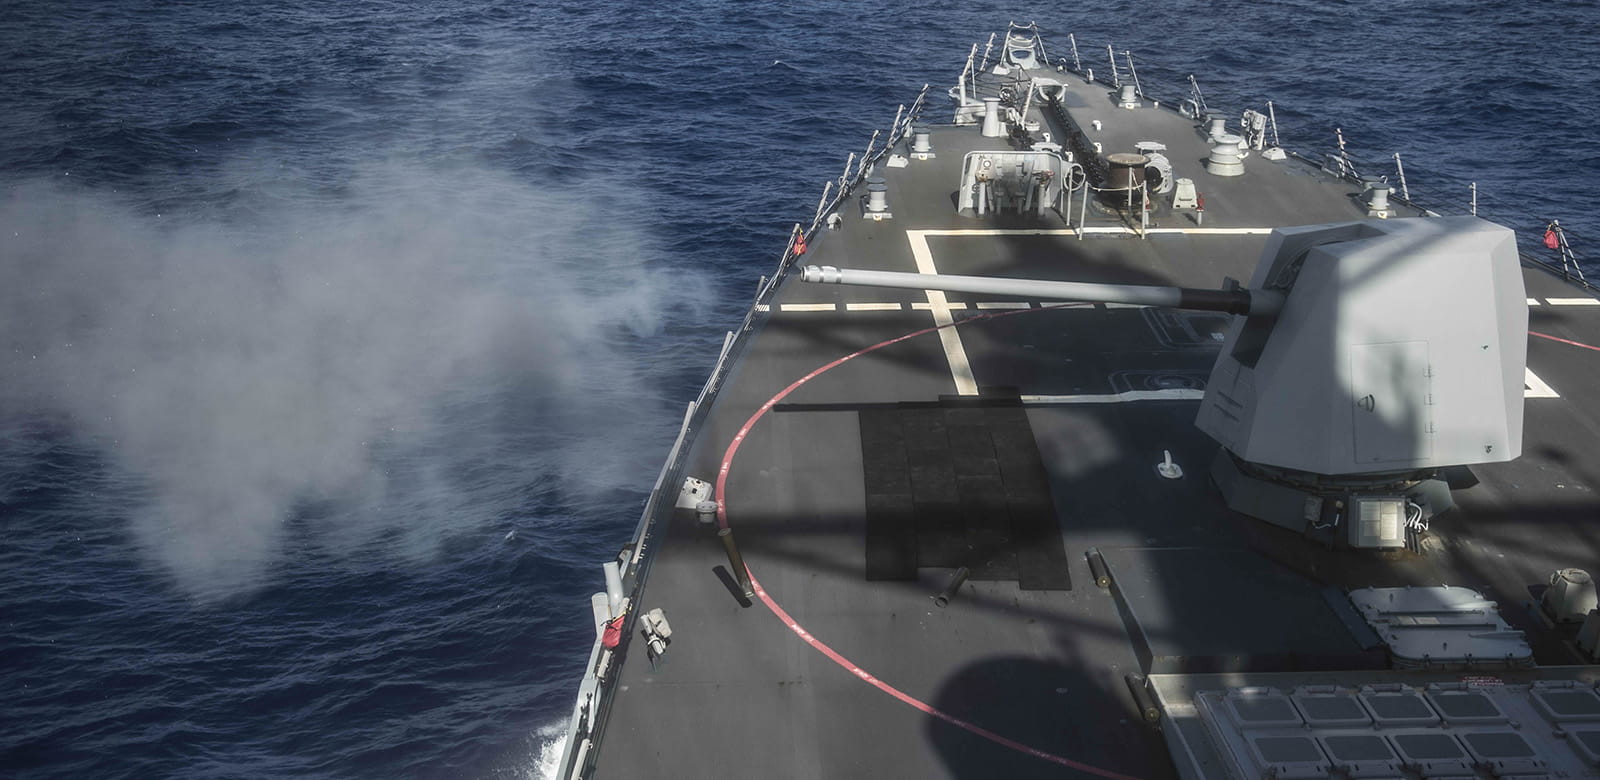 The Excalibur munition’s naval 5-inch variant will offer long-range precision fire to counter fast attack craft and provide naval surface fire support. (Photo: U.S. Navy)